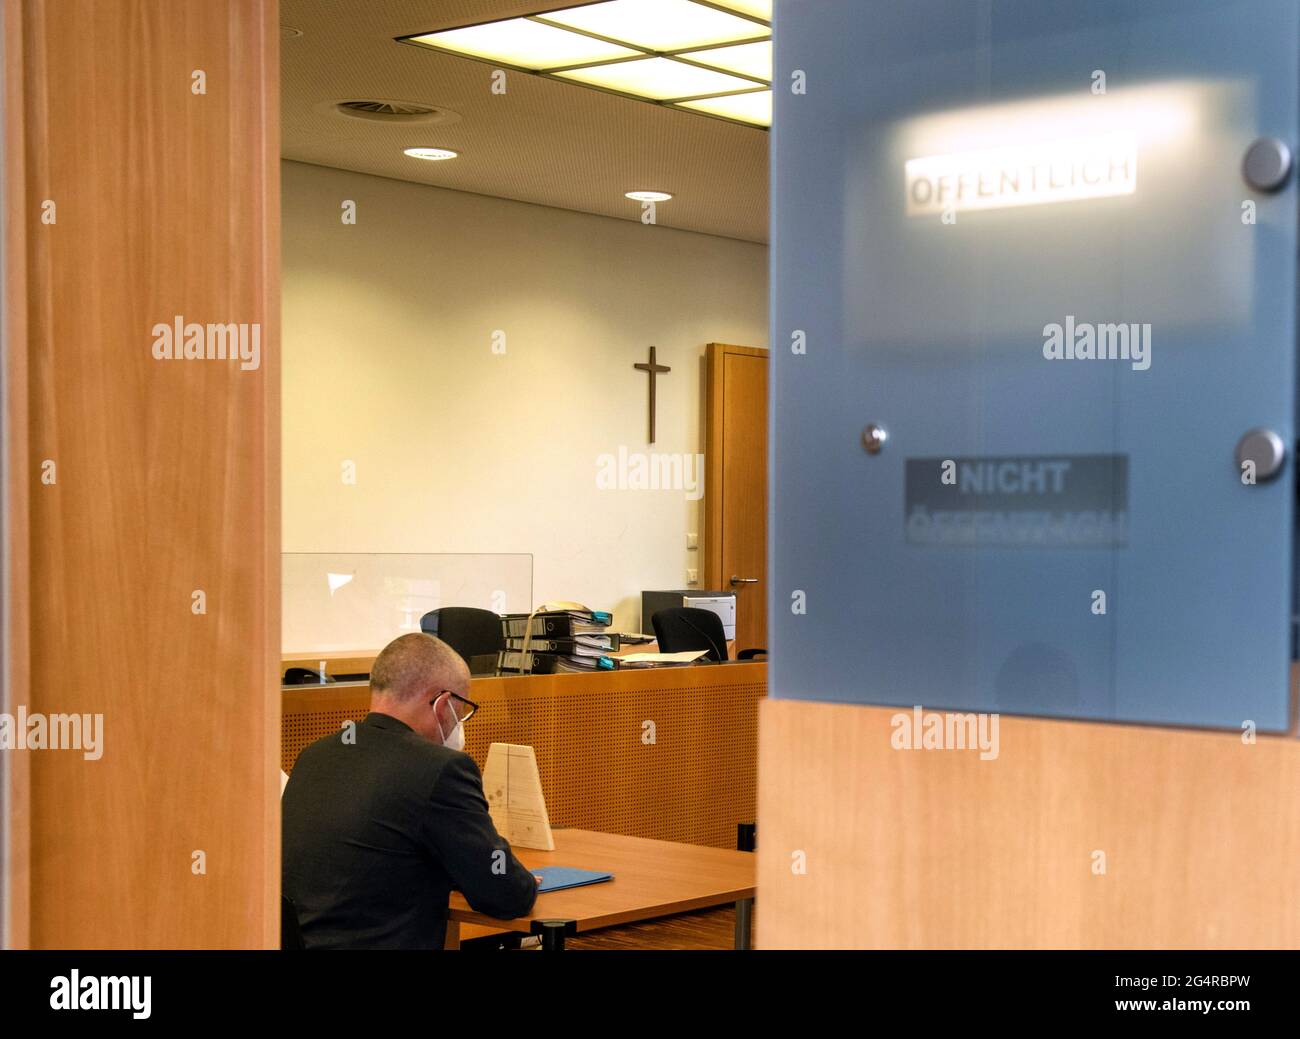 Slander High Resolution Stock Photography and Images - Alamy